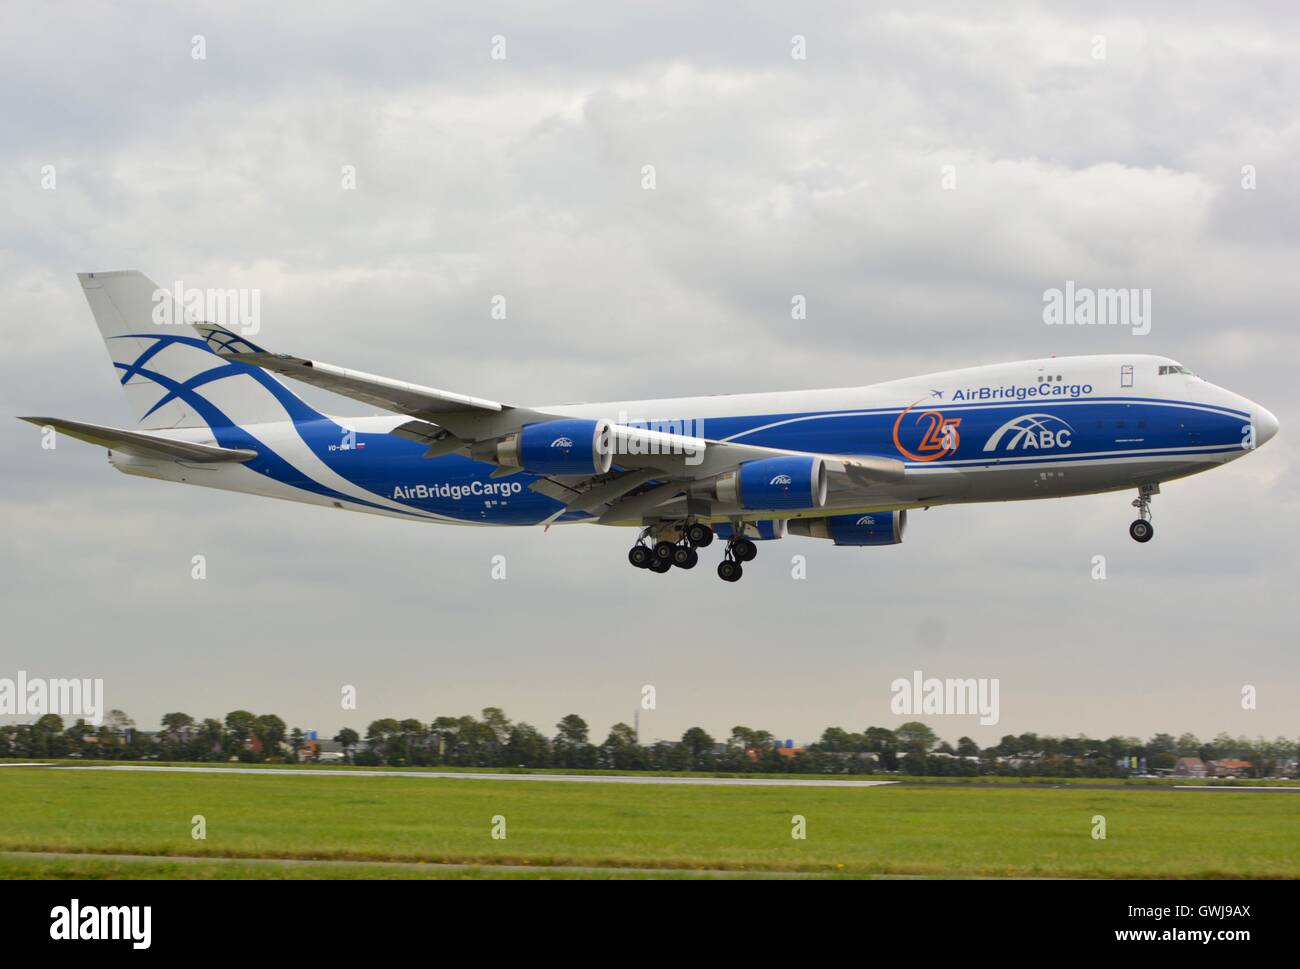 Boeing B747-400F from Air Bridge Cargo just about to touch down in Amsterdam Stock Photo